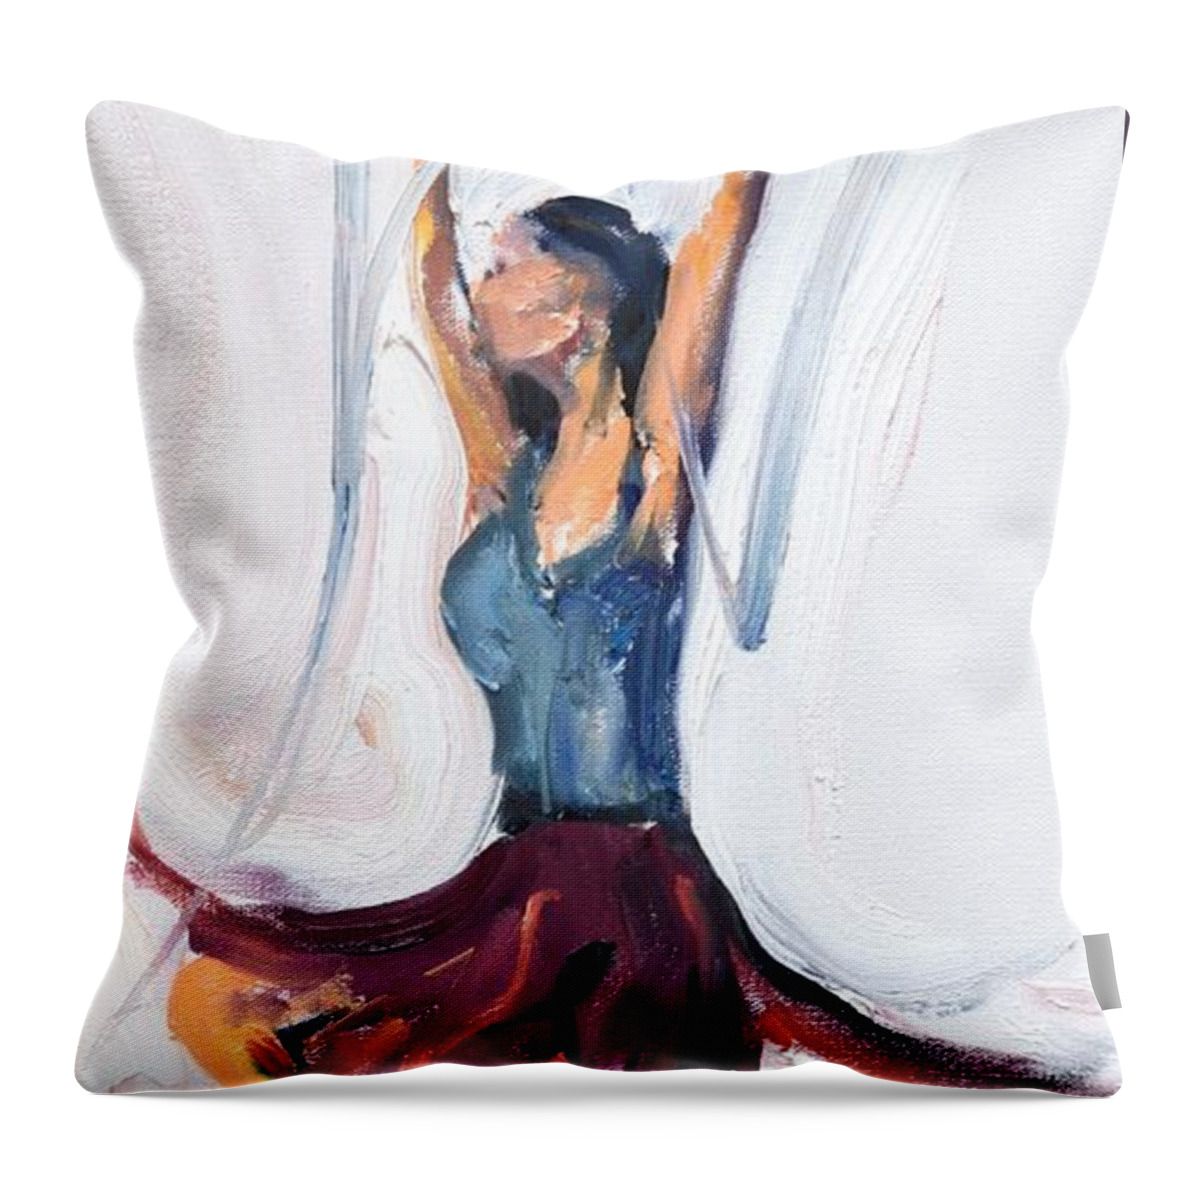 Dance Throw Pillow featuring the painting Rebekah's Dance Series 1 Pose 2 by Donna Tuten